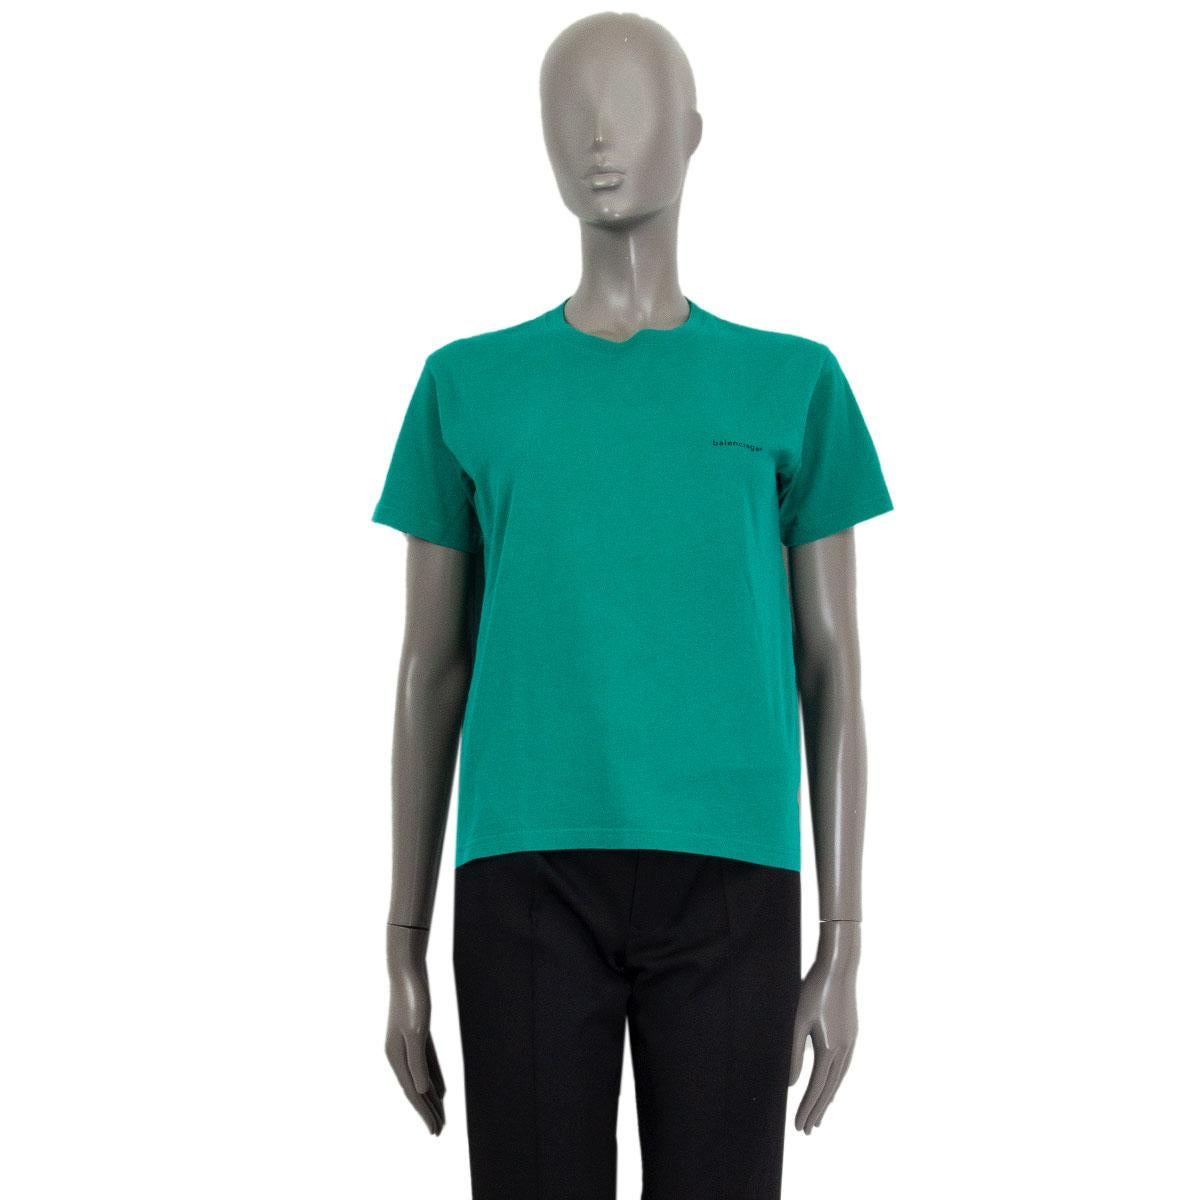 100% authentic Balenciaga basic short-sleeved t-shirt in pertol green cotton (100%) in a box cropped fit. The labels logo is printed in black on the left chest. Has been worn and is in excellent condition. 

Tag Size M
Size M
Shoulder Width 43cm